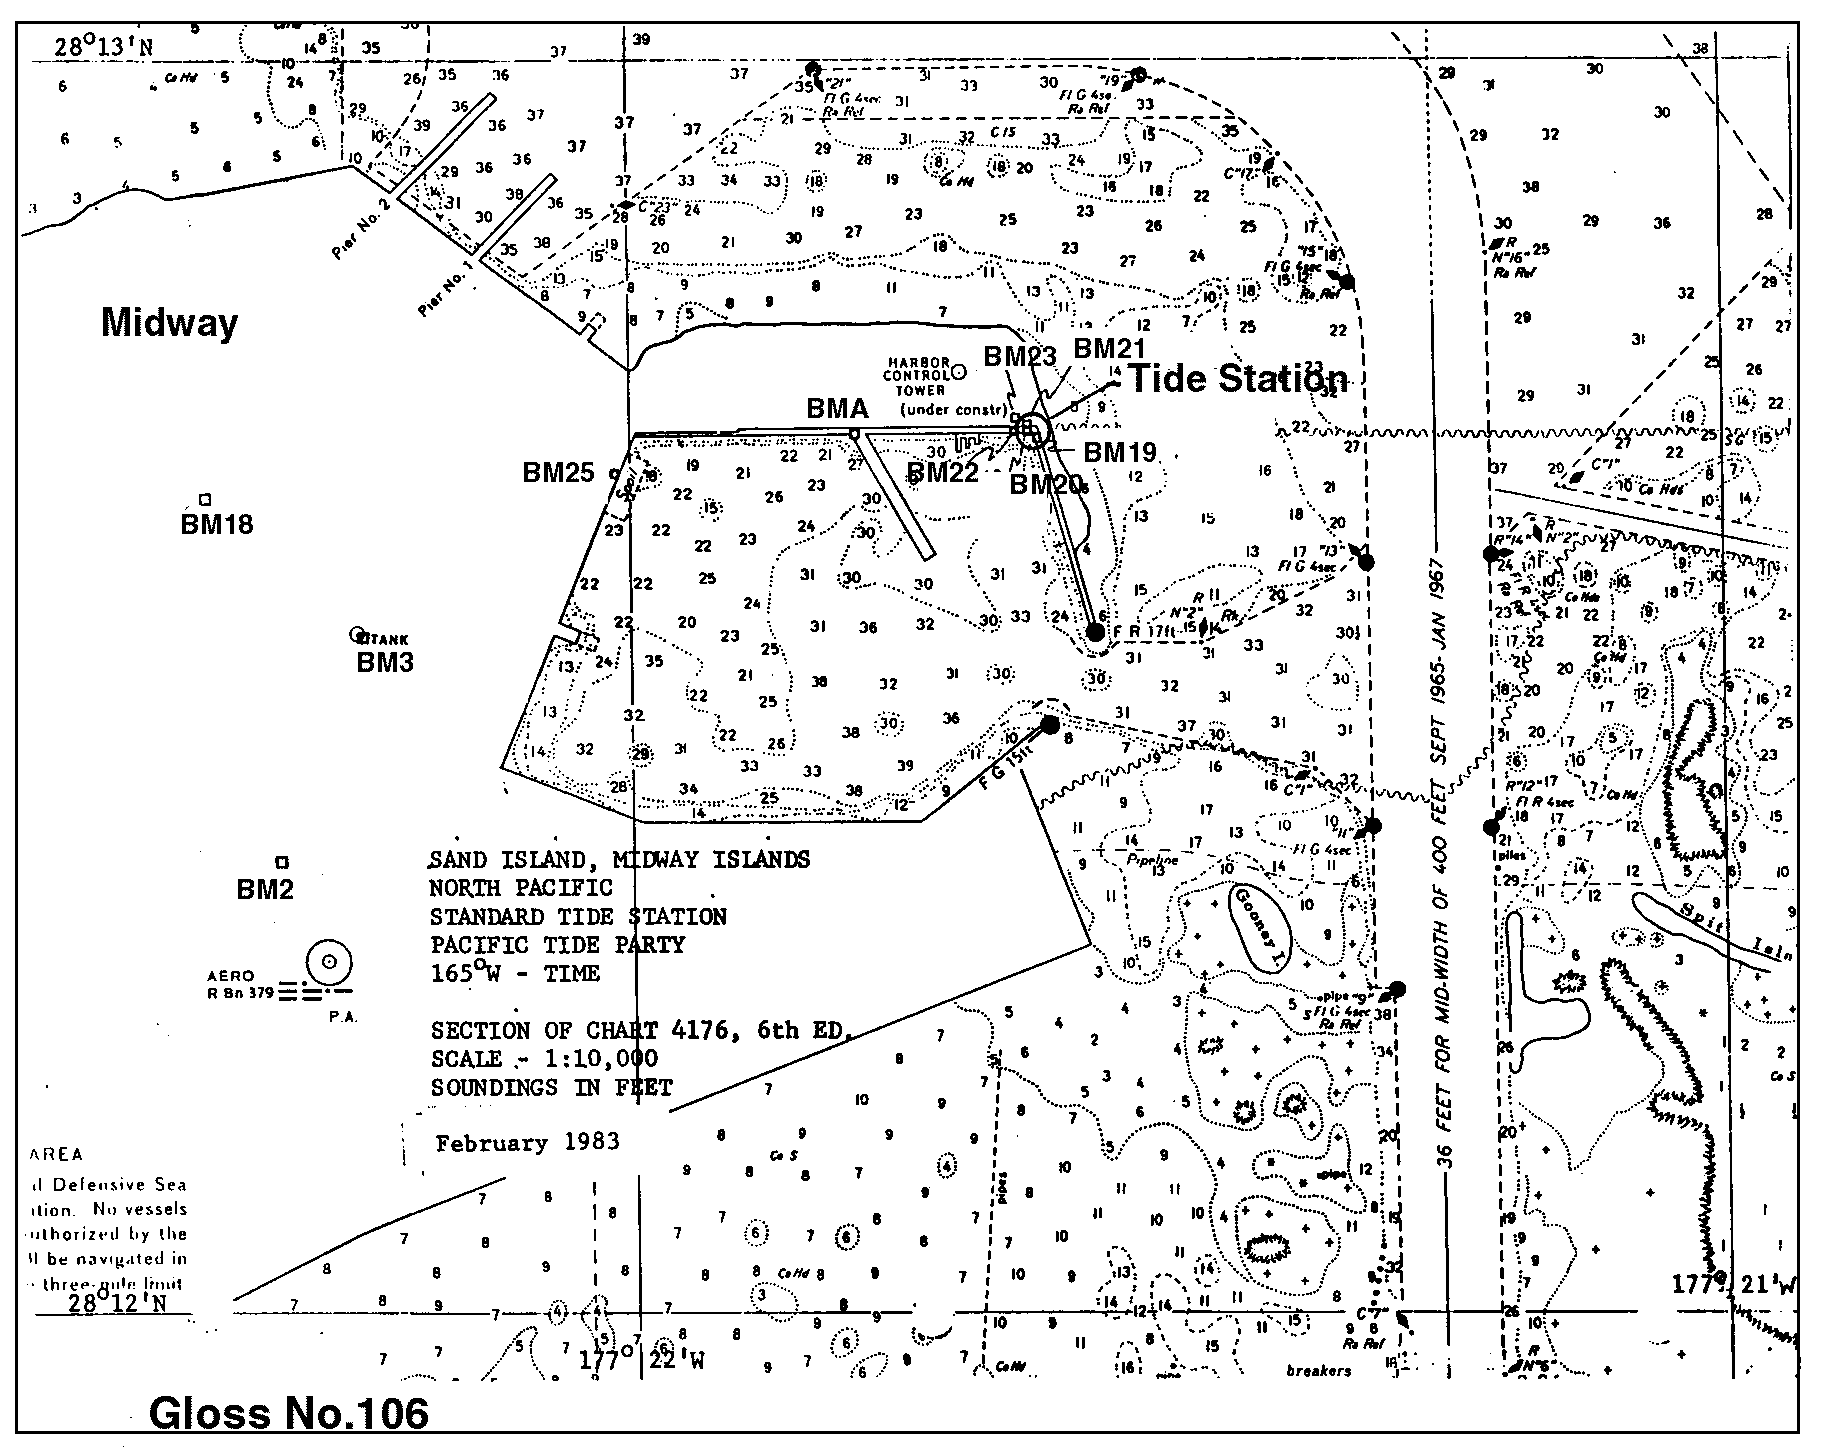 Location map for Midway Is, Hawaiian Is., U.S.A.